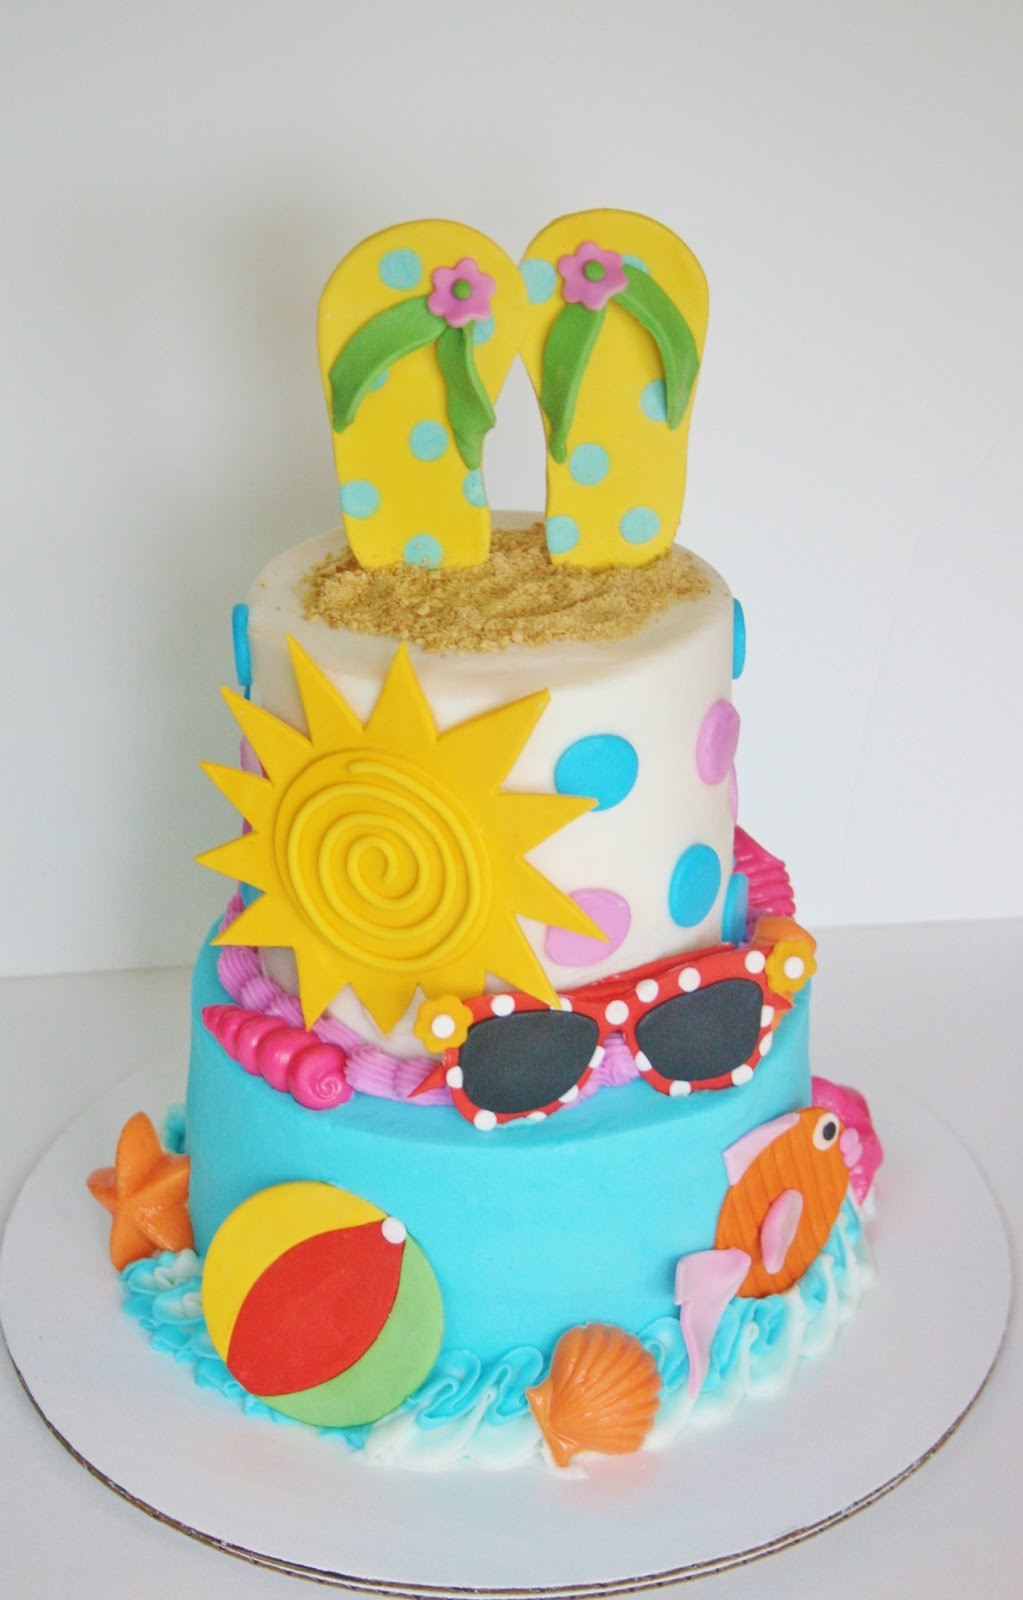 Summer Birthday Cake Ideas
 And Everything Sweet Summer is HERE